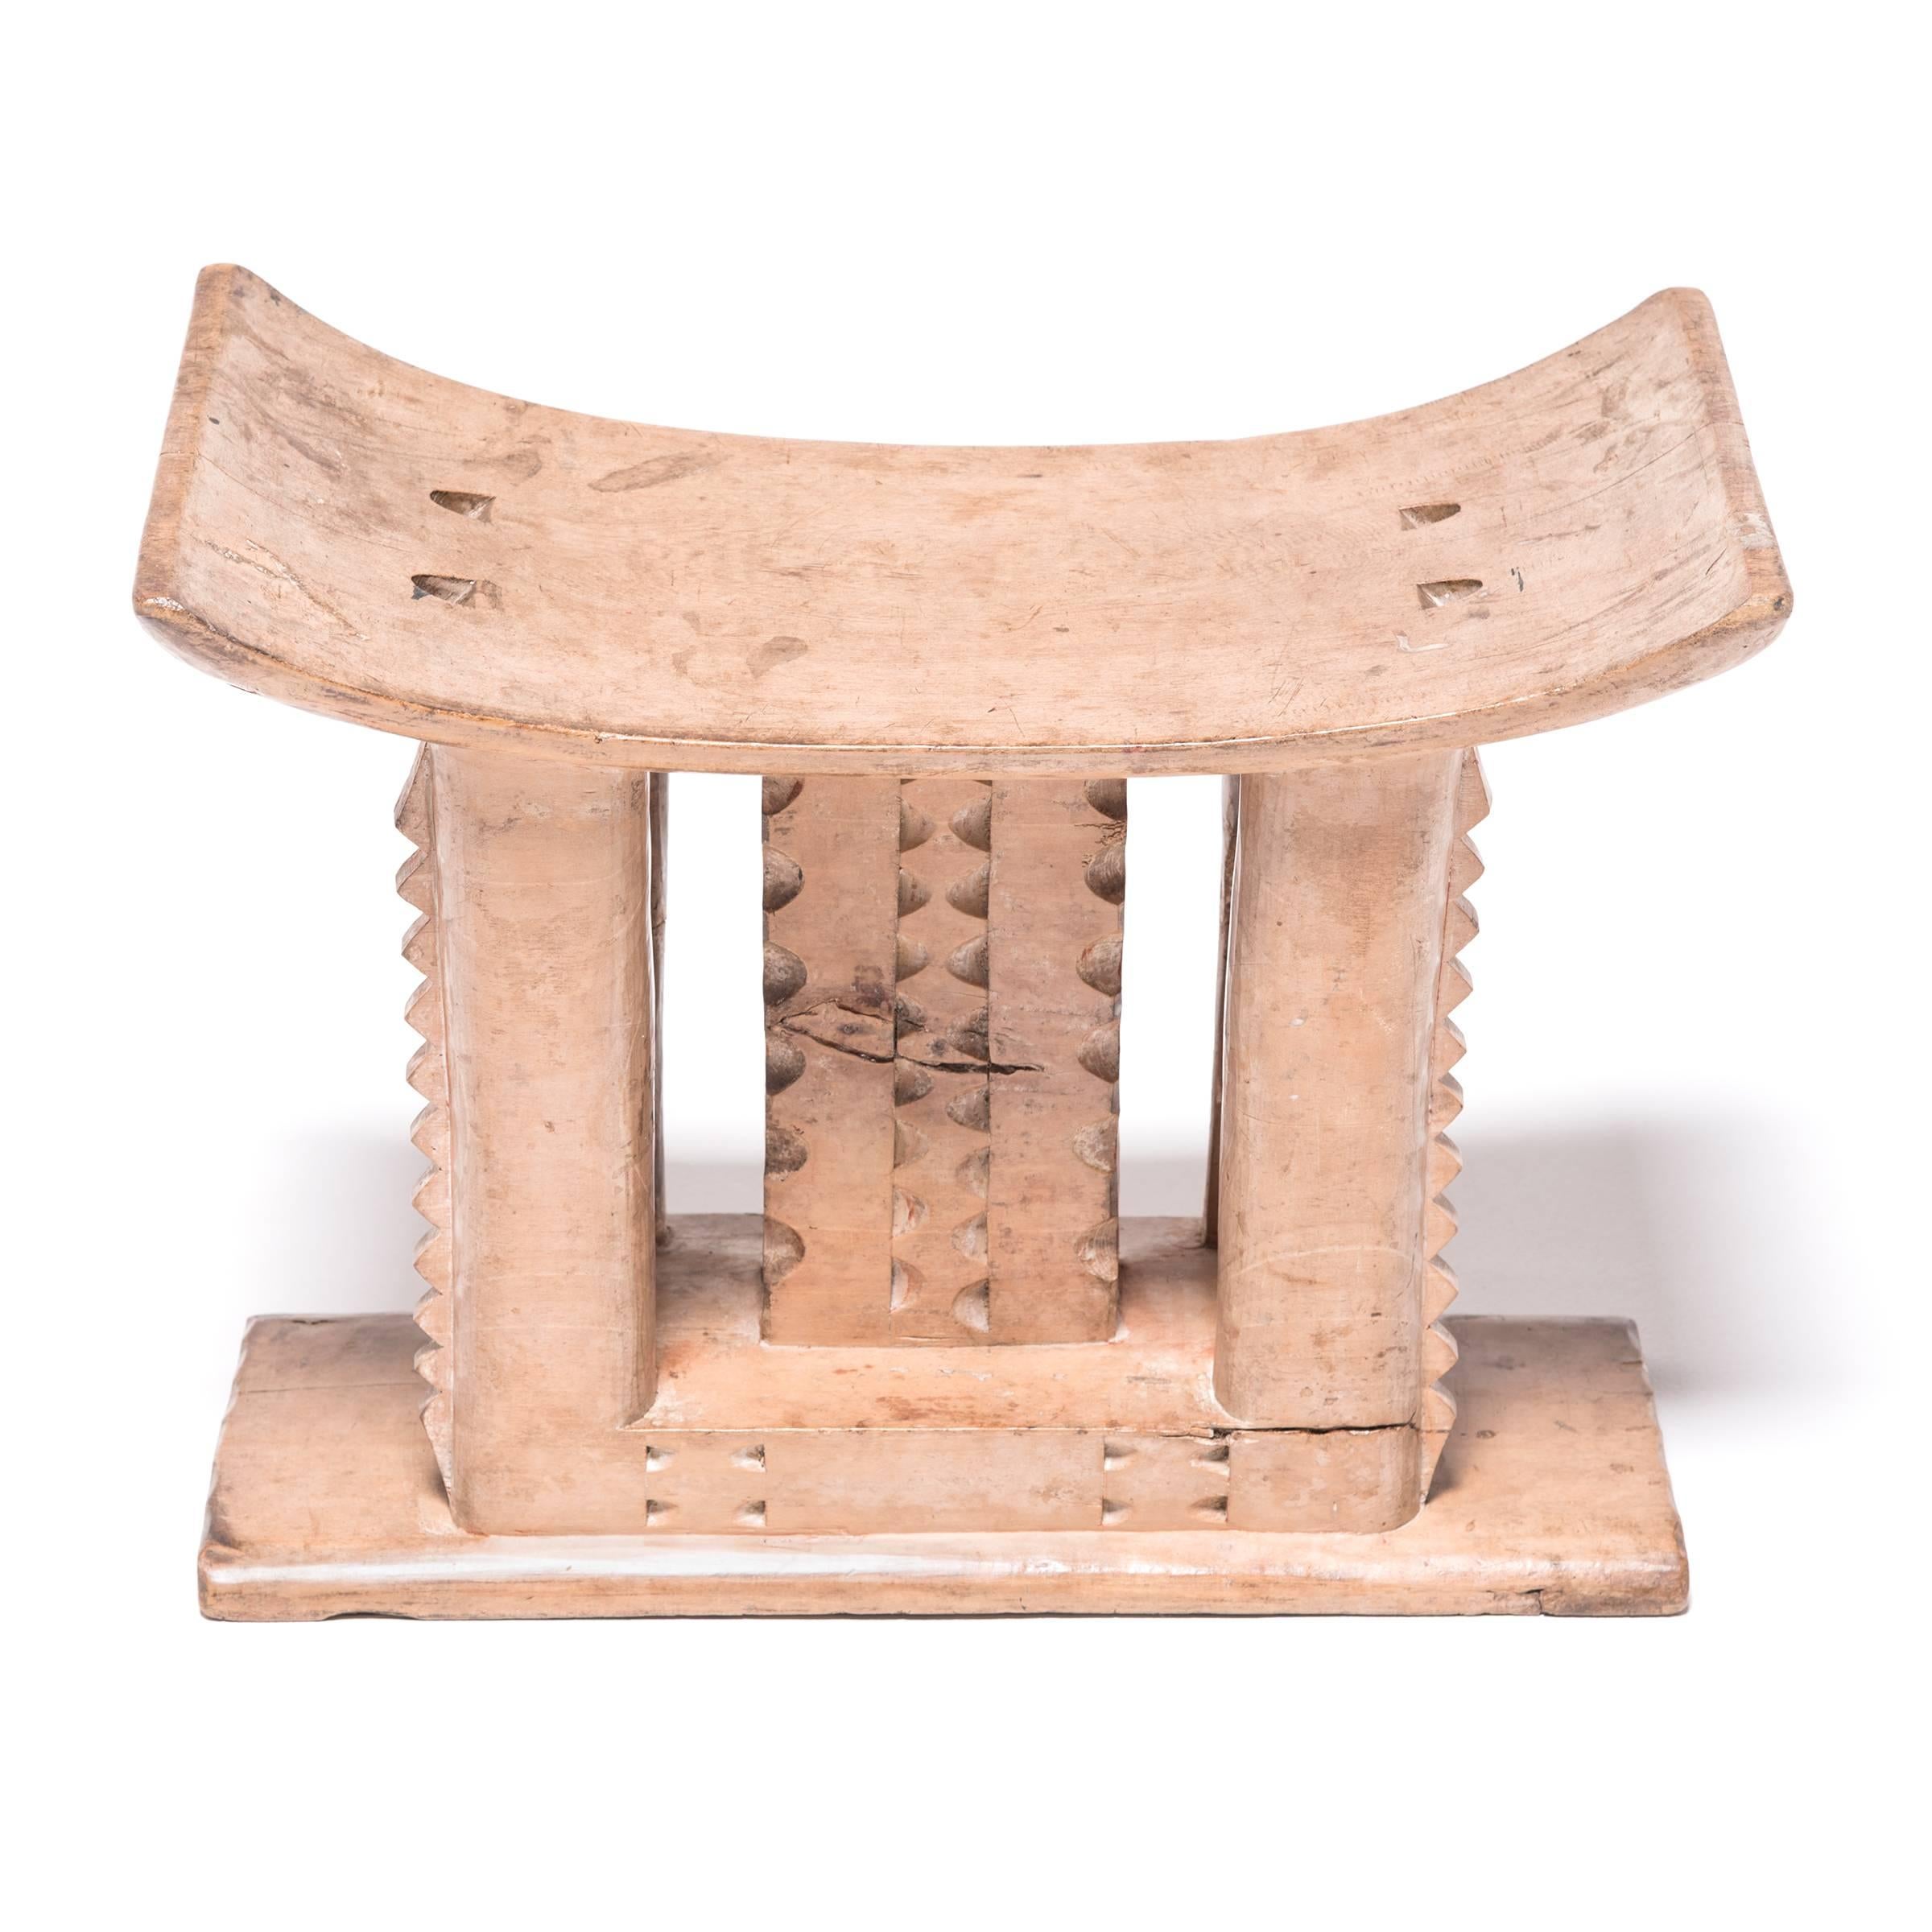 Stools indicated power, status, and lines of succession in traditional Ashanti culture. The flat base, curved seat, and ridged supports reference the Ashanti King stool. While many stools of this type incorporate carvings from the Adinkra symbol